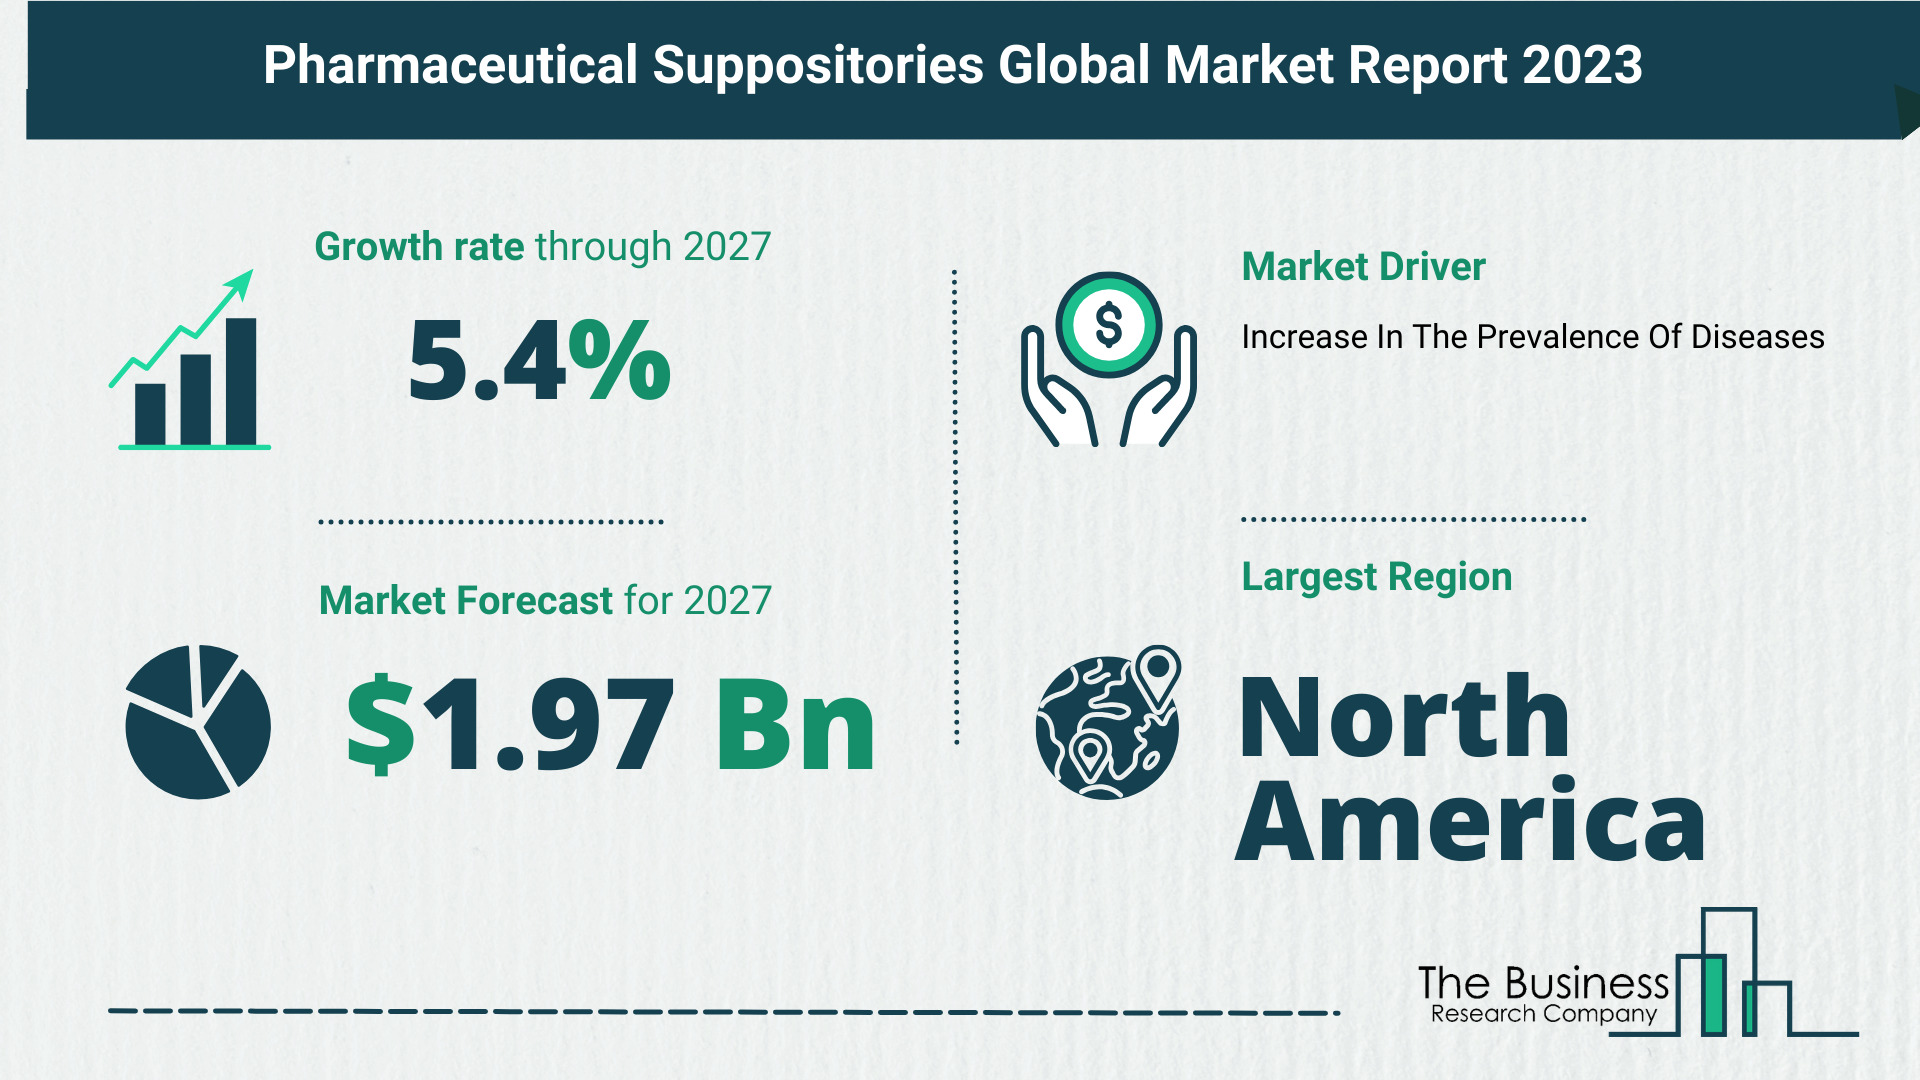 Global Pharmaceutical Suppositories Market